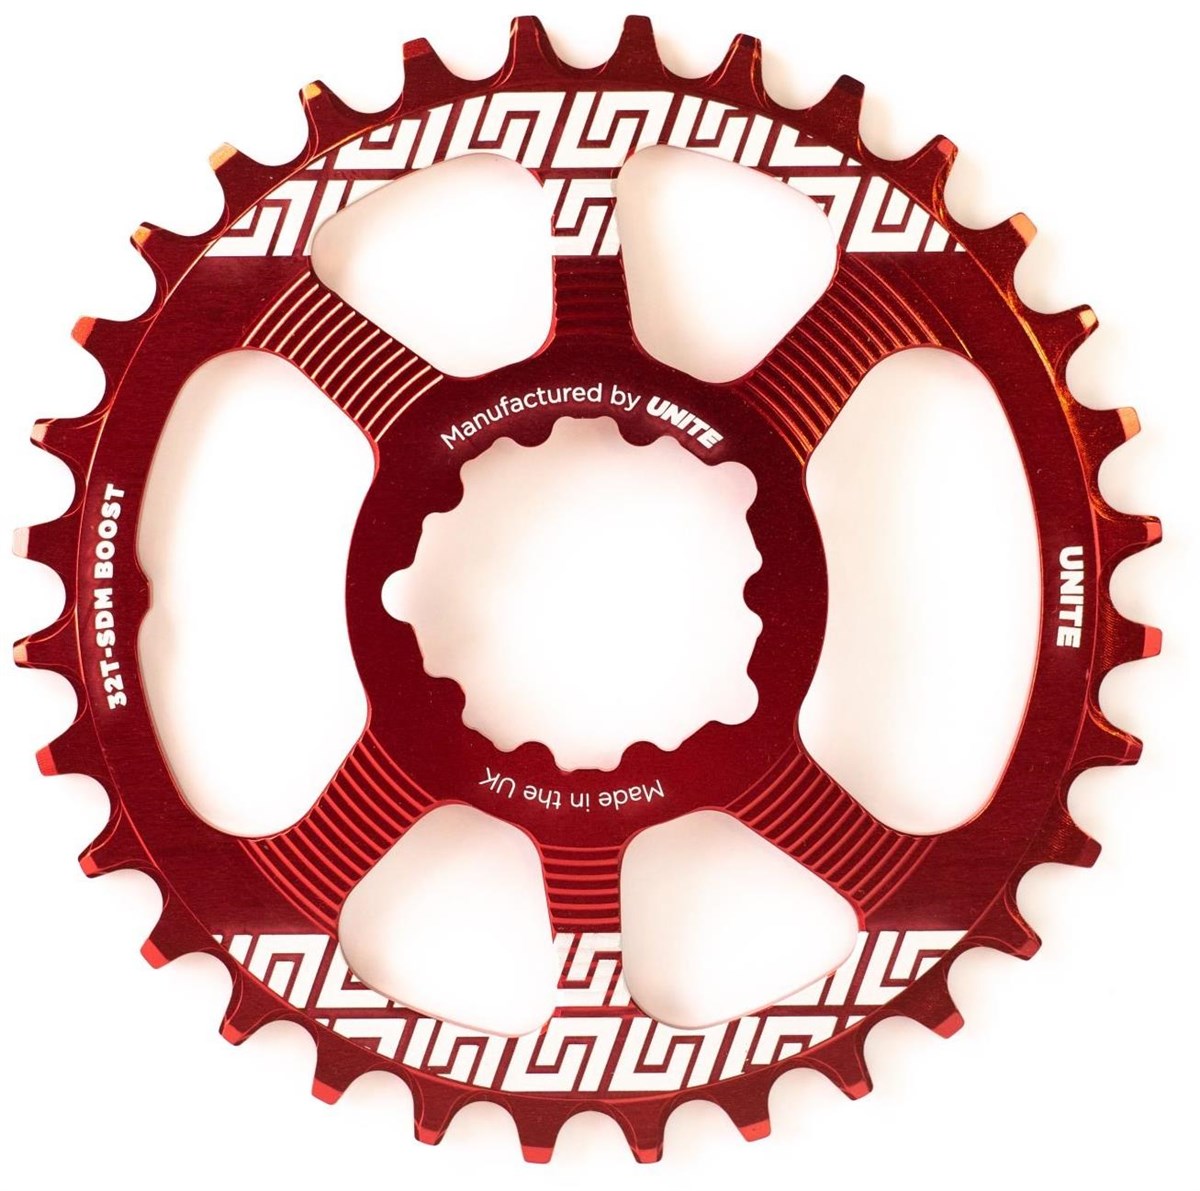 Unite SRAM Direct Mount Boost Grip Chain Ring product image